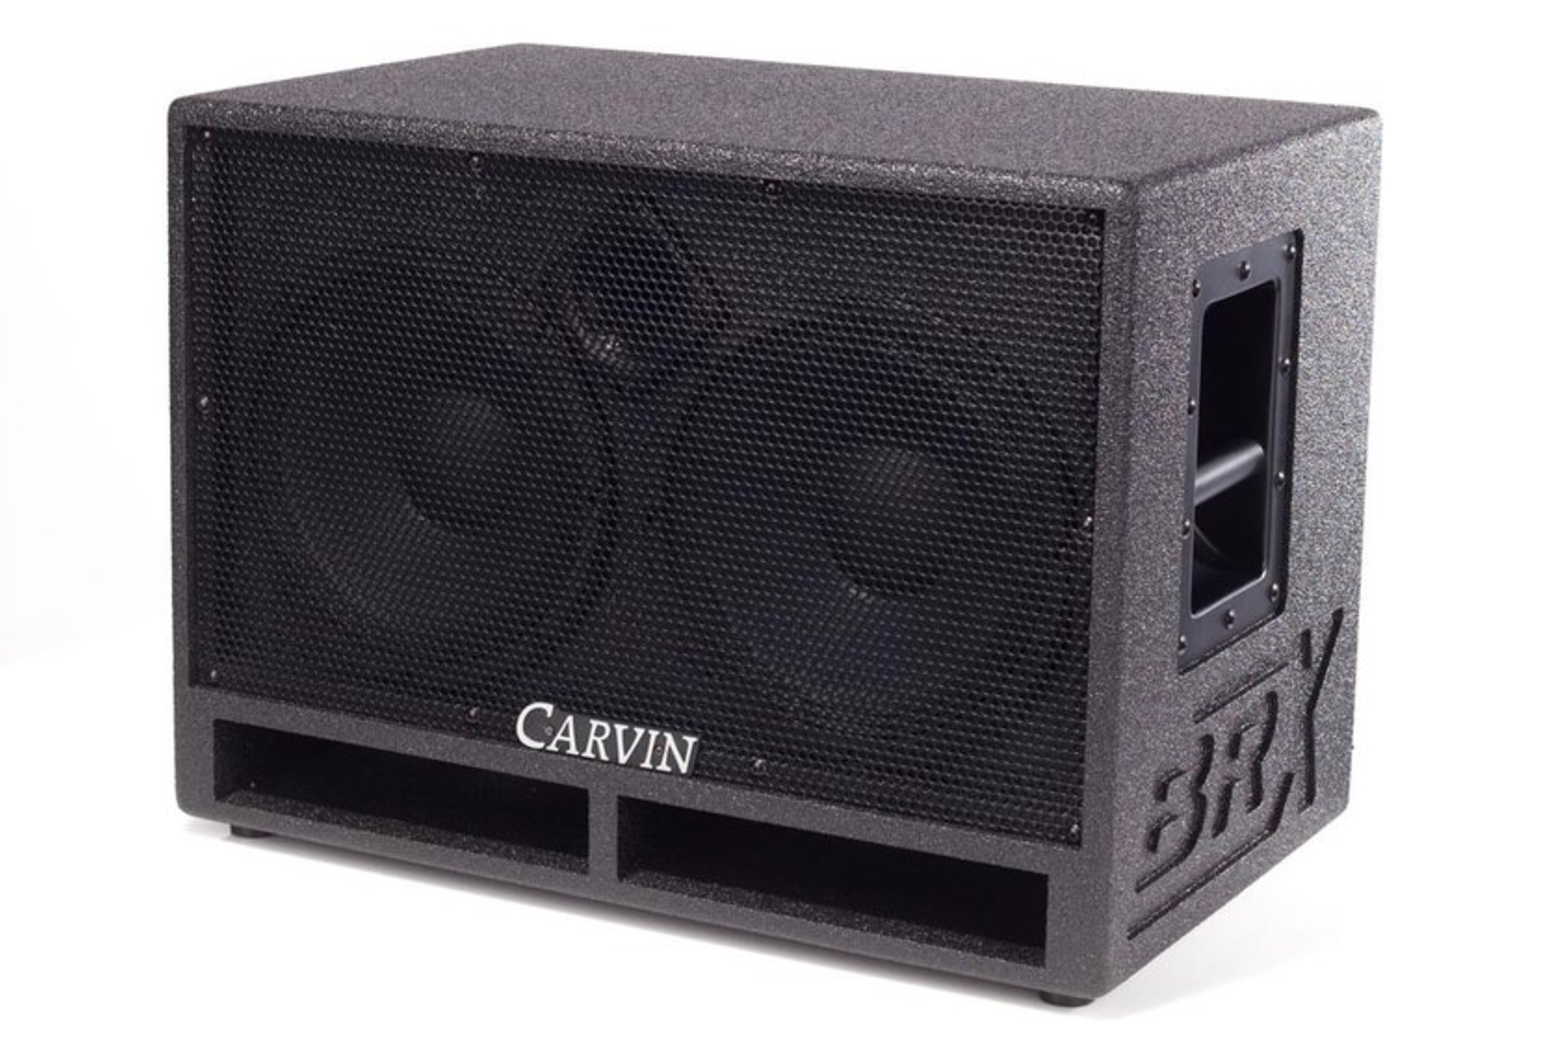 Floor Coupling: Why Getting Your Bass Amp Off the Floor May Help Your Tone